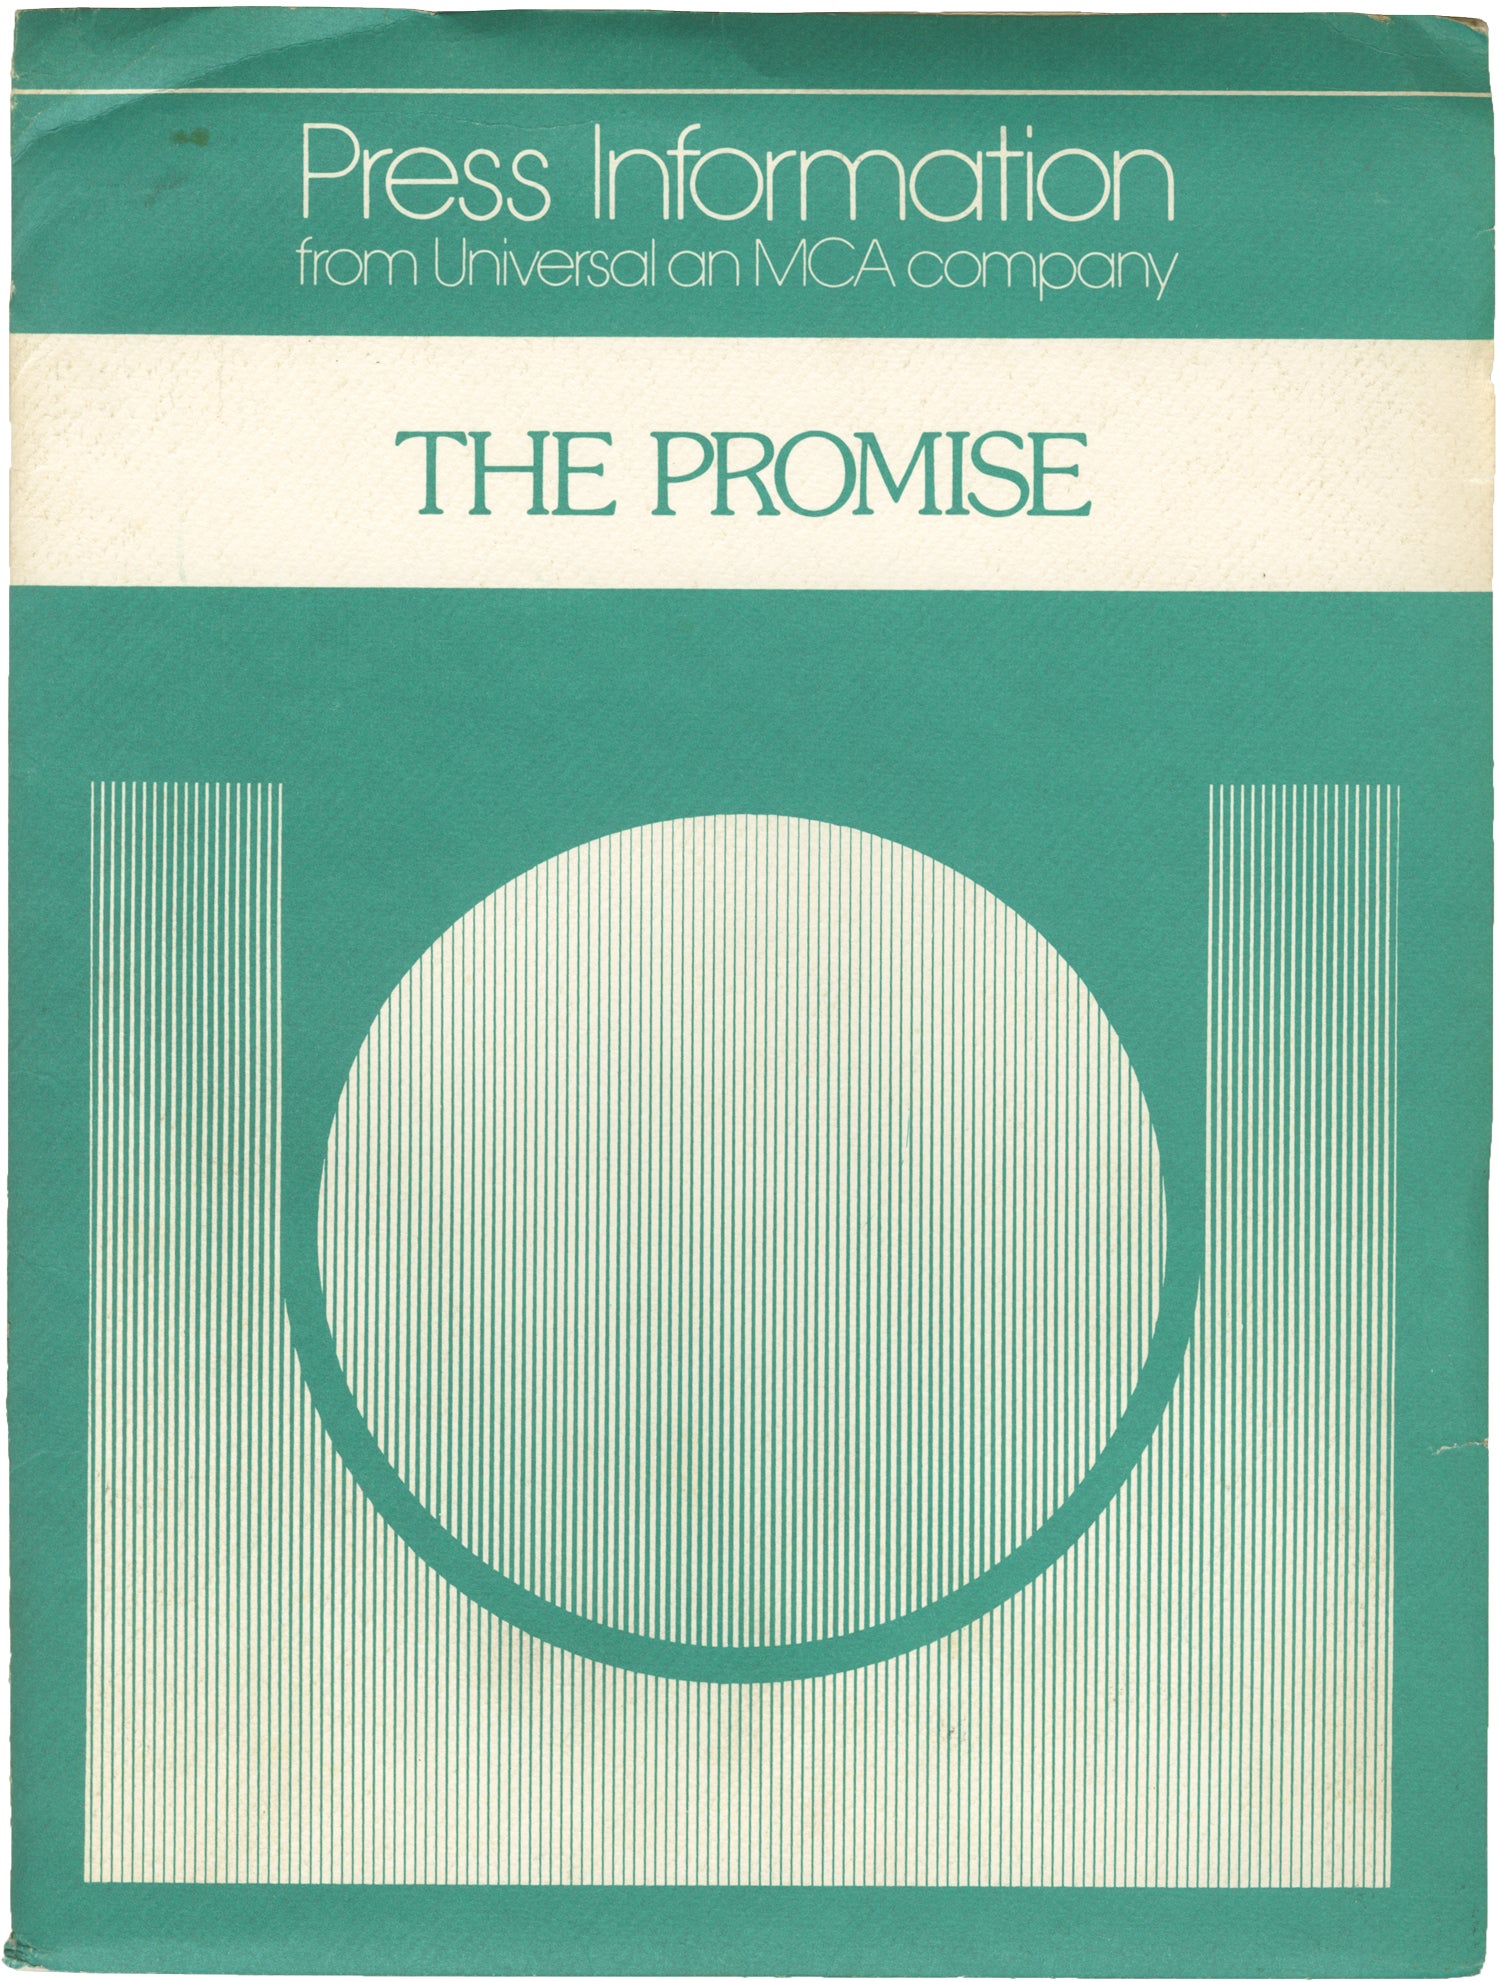  The Promise (1979) [Blu-ray] : Gilbert Cates, Kathleen Quinlan,  Stephen Collins, Beatrice Straight: Movies & TV